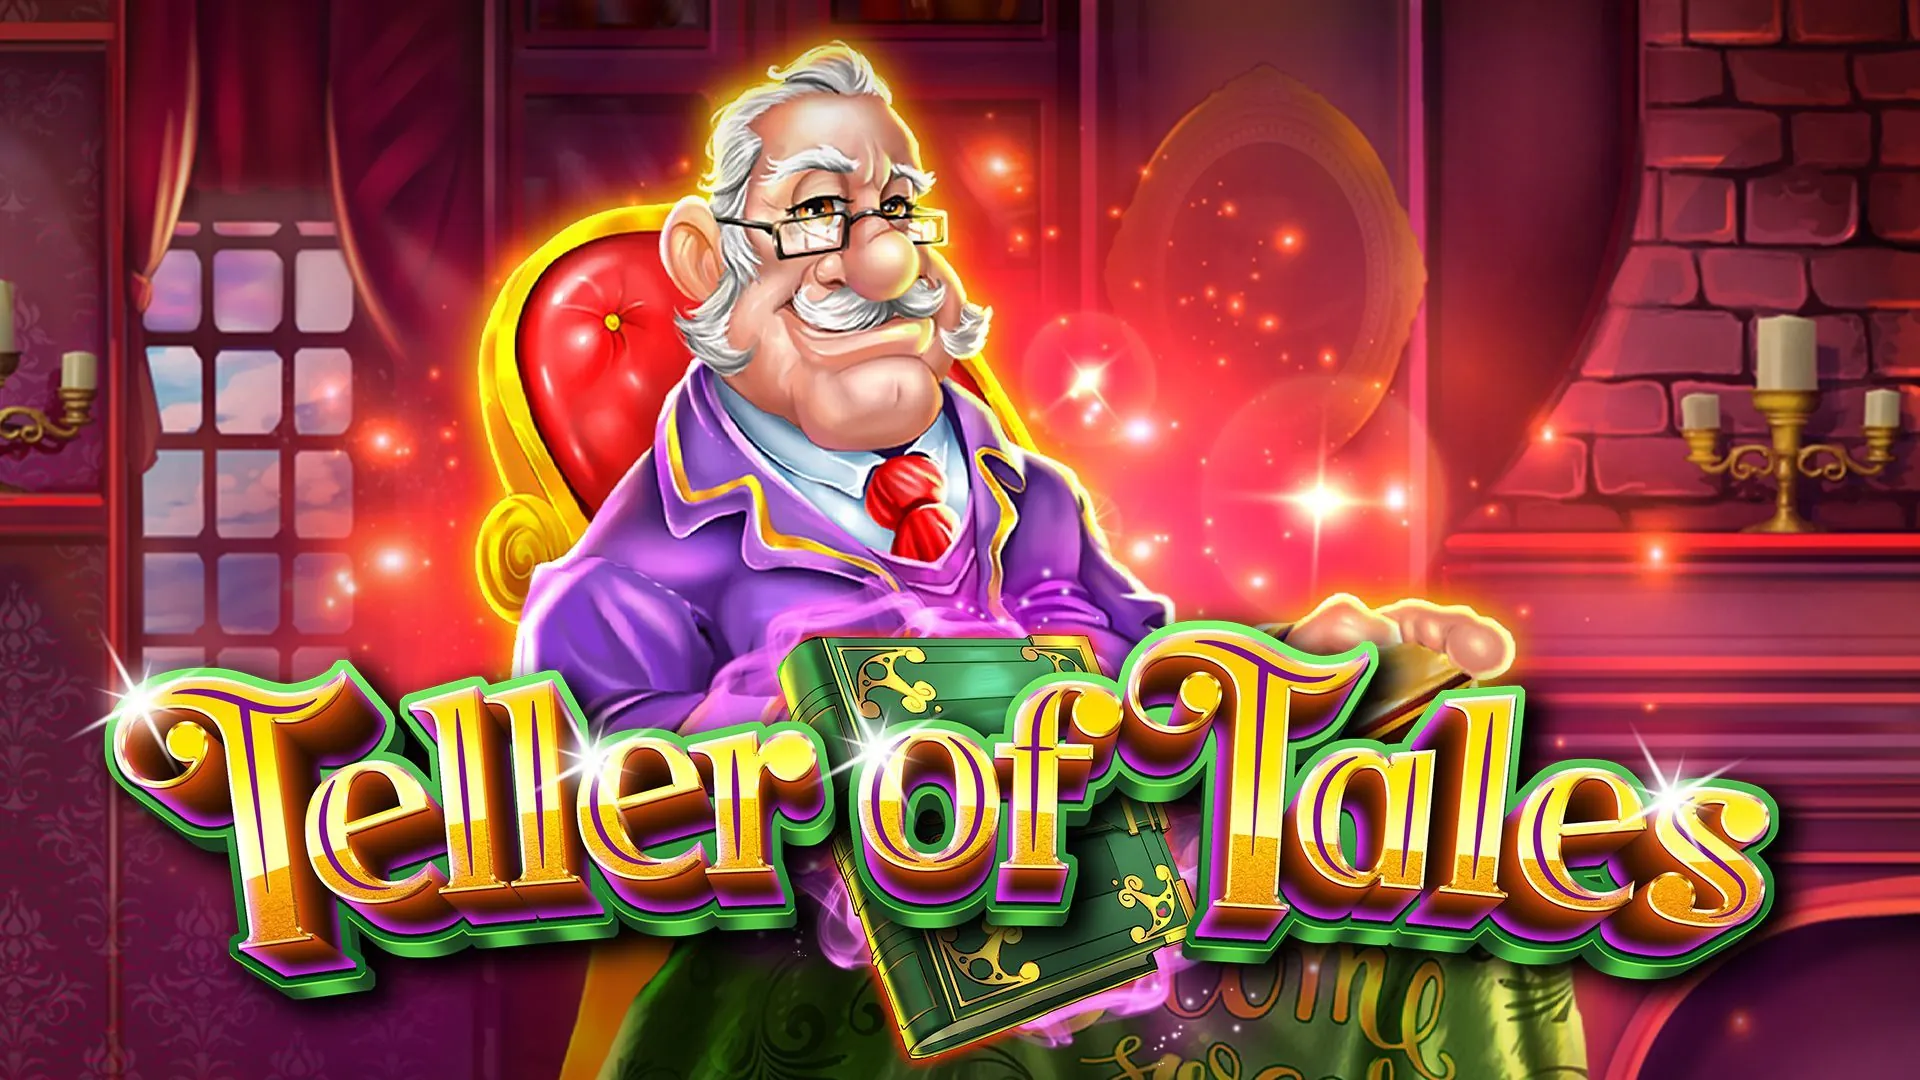 Teller of Tales is out now!